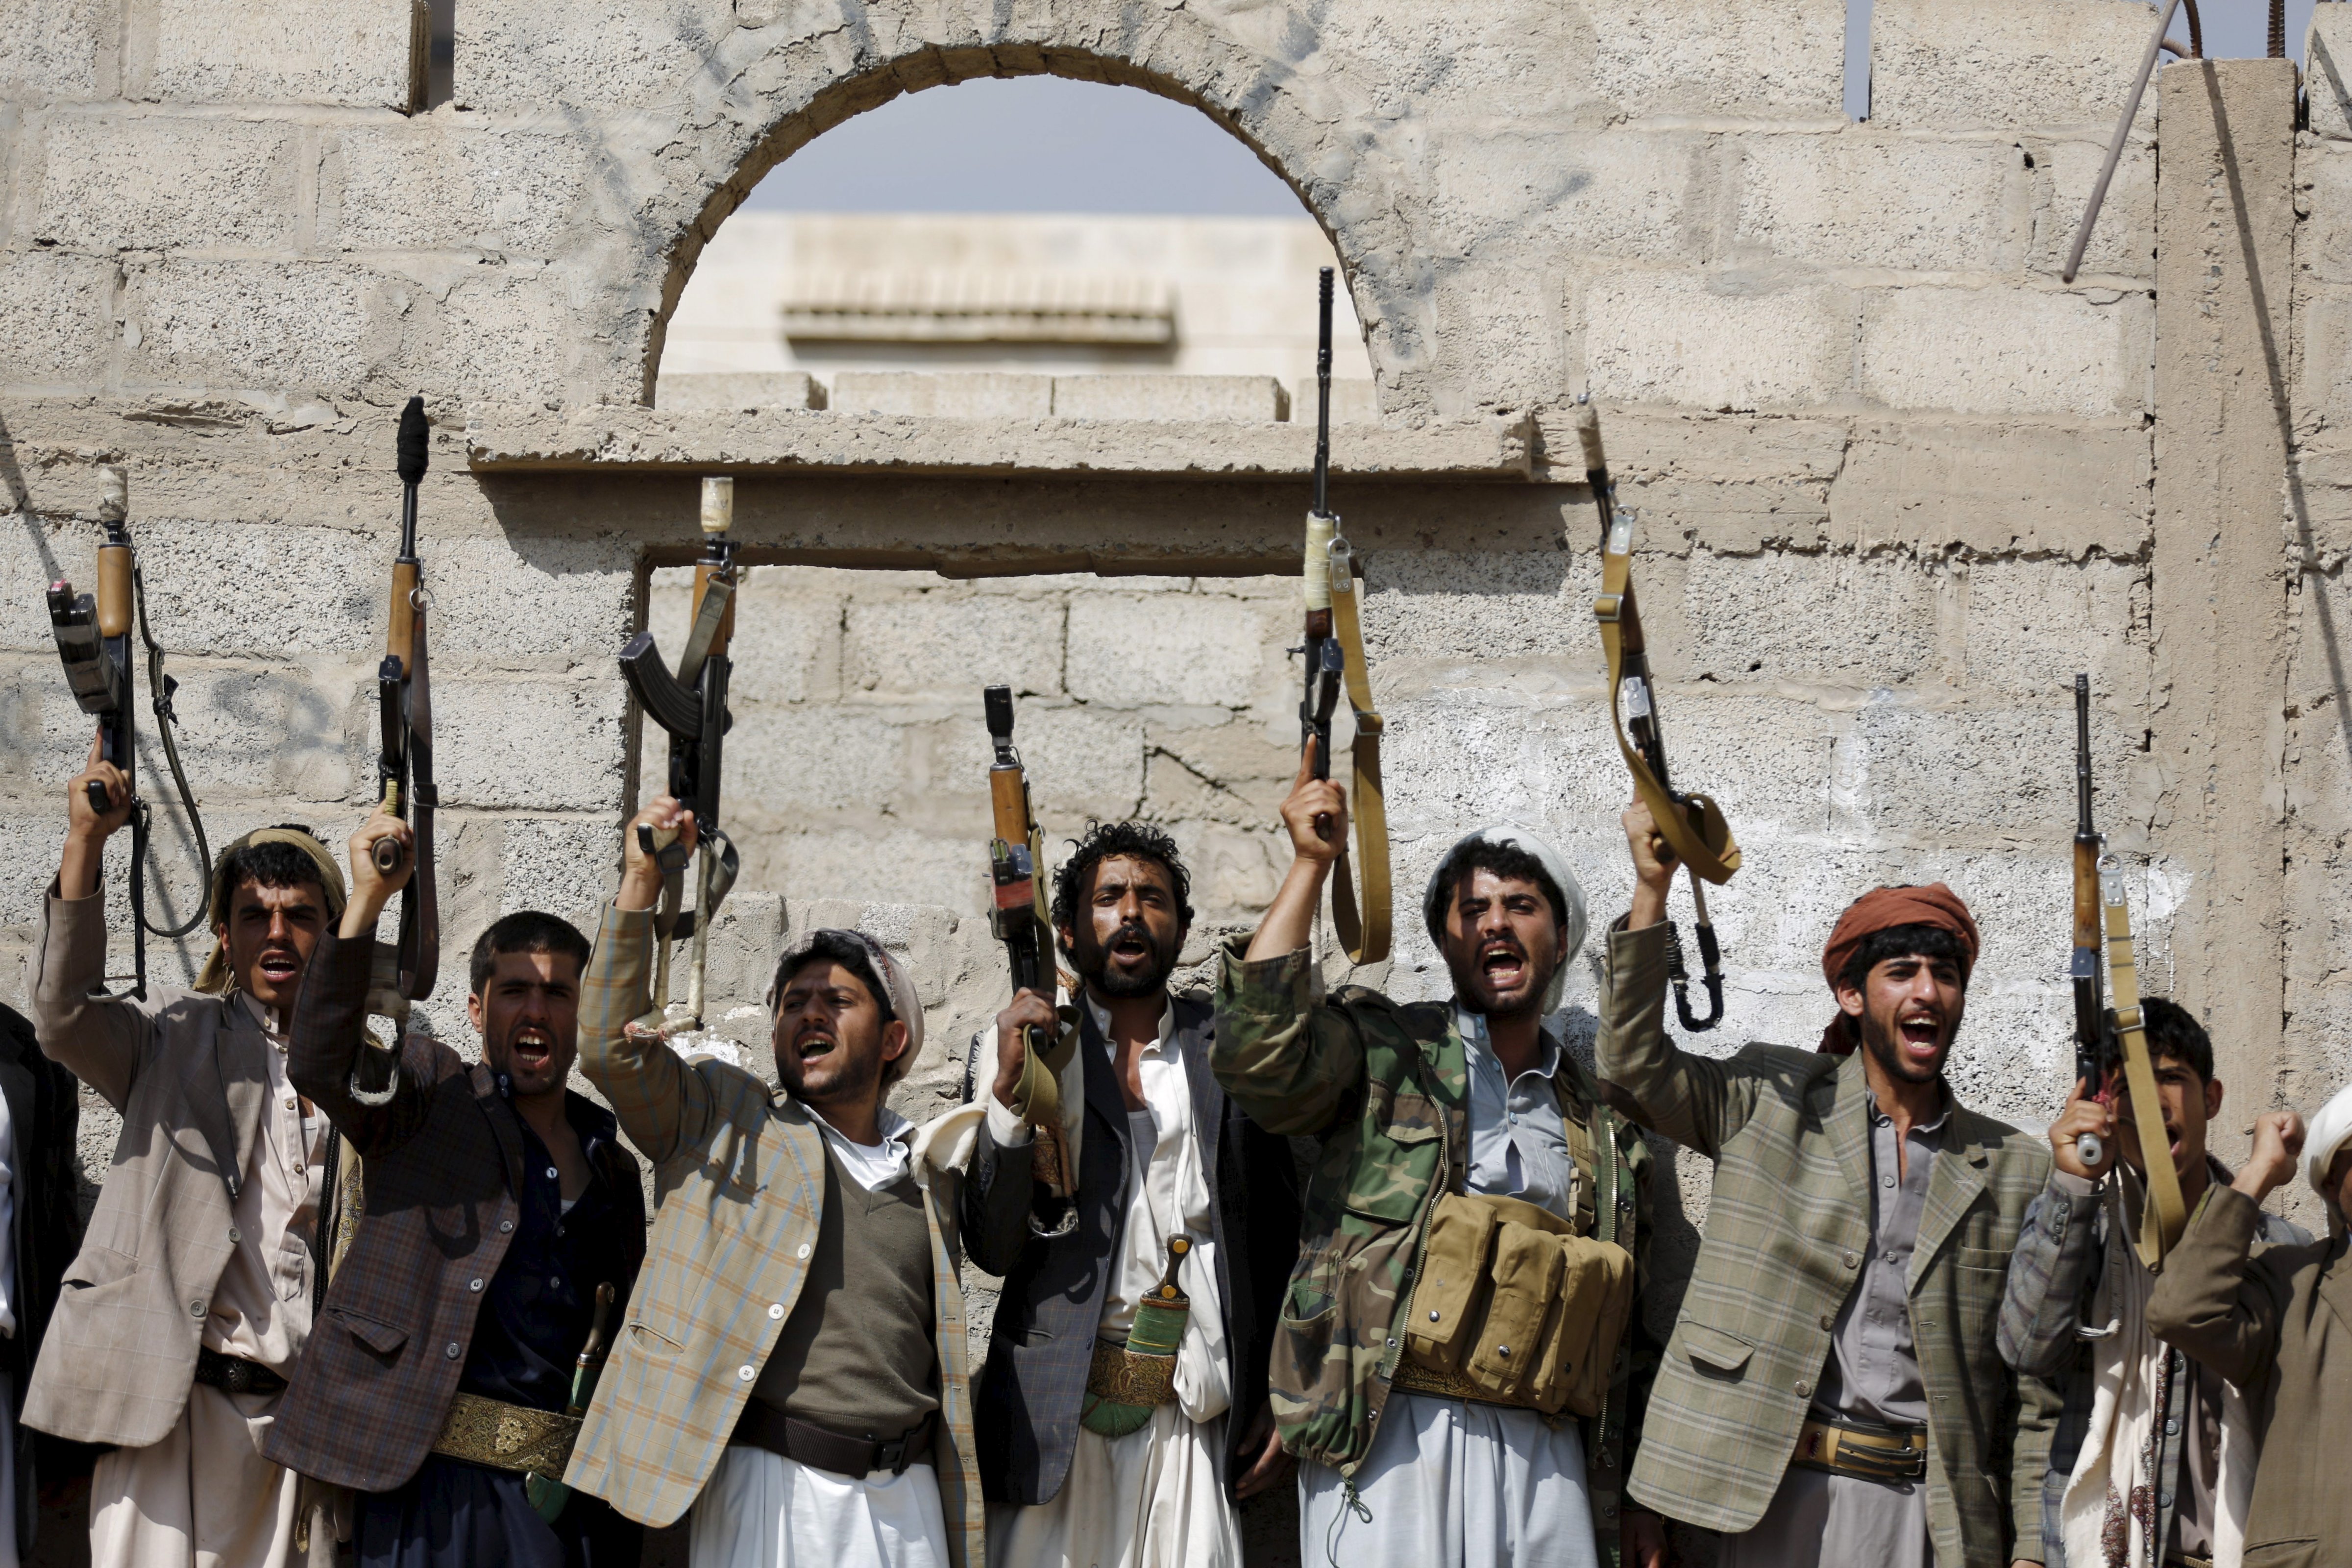 Tribesmen loyal to the Houthi movement shout slogans and raise their weapons during a gathering to show their support for the group, in Yemen's capital Sanaa